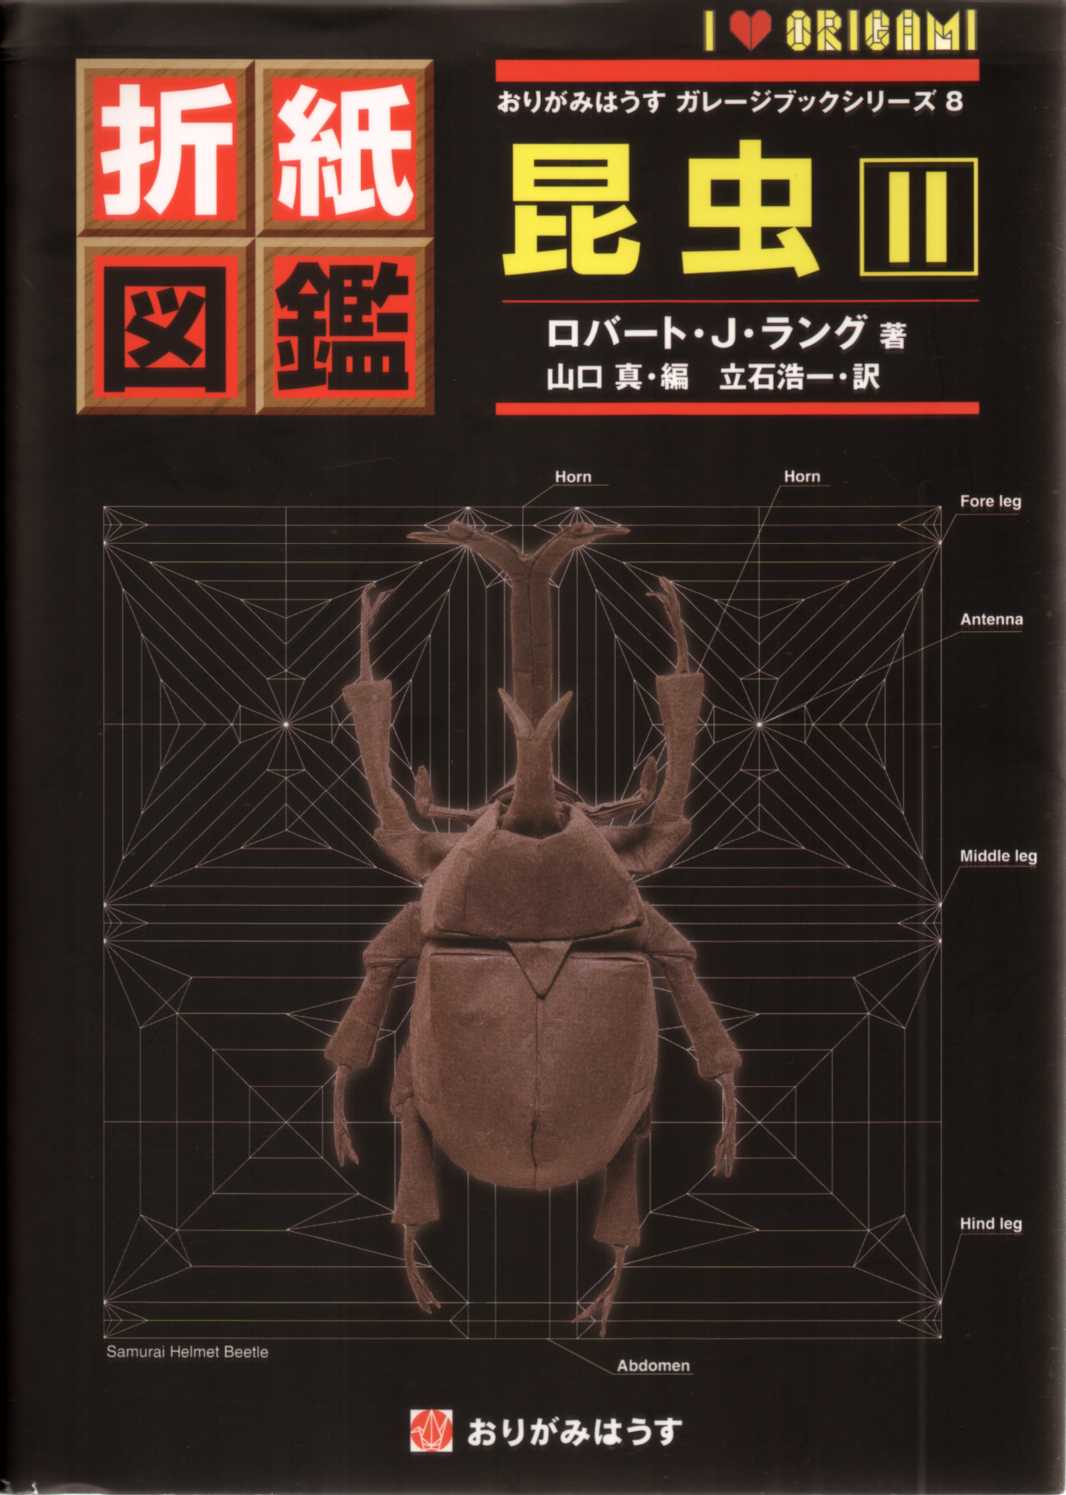 Origami Insects II / 折紙図鑑　昆虫・2 : page 167.